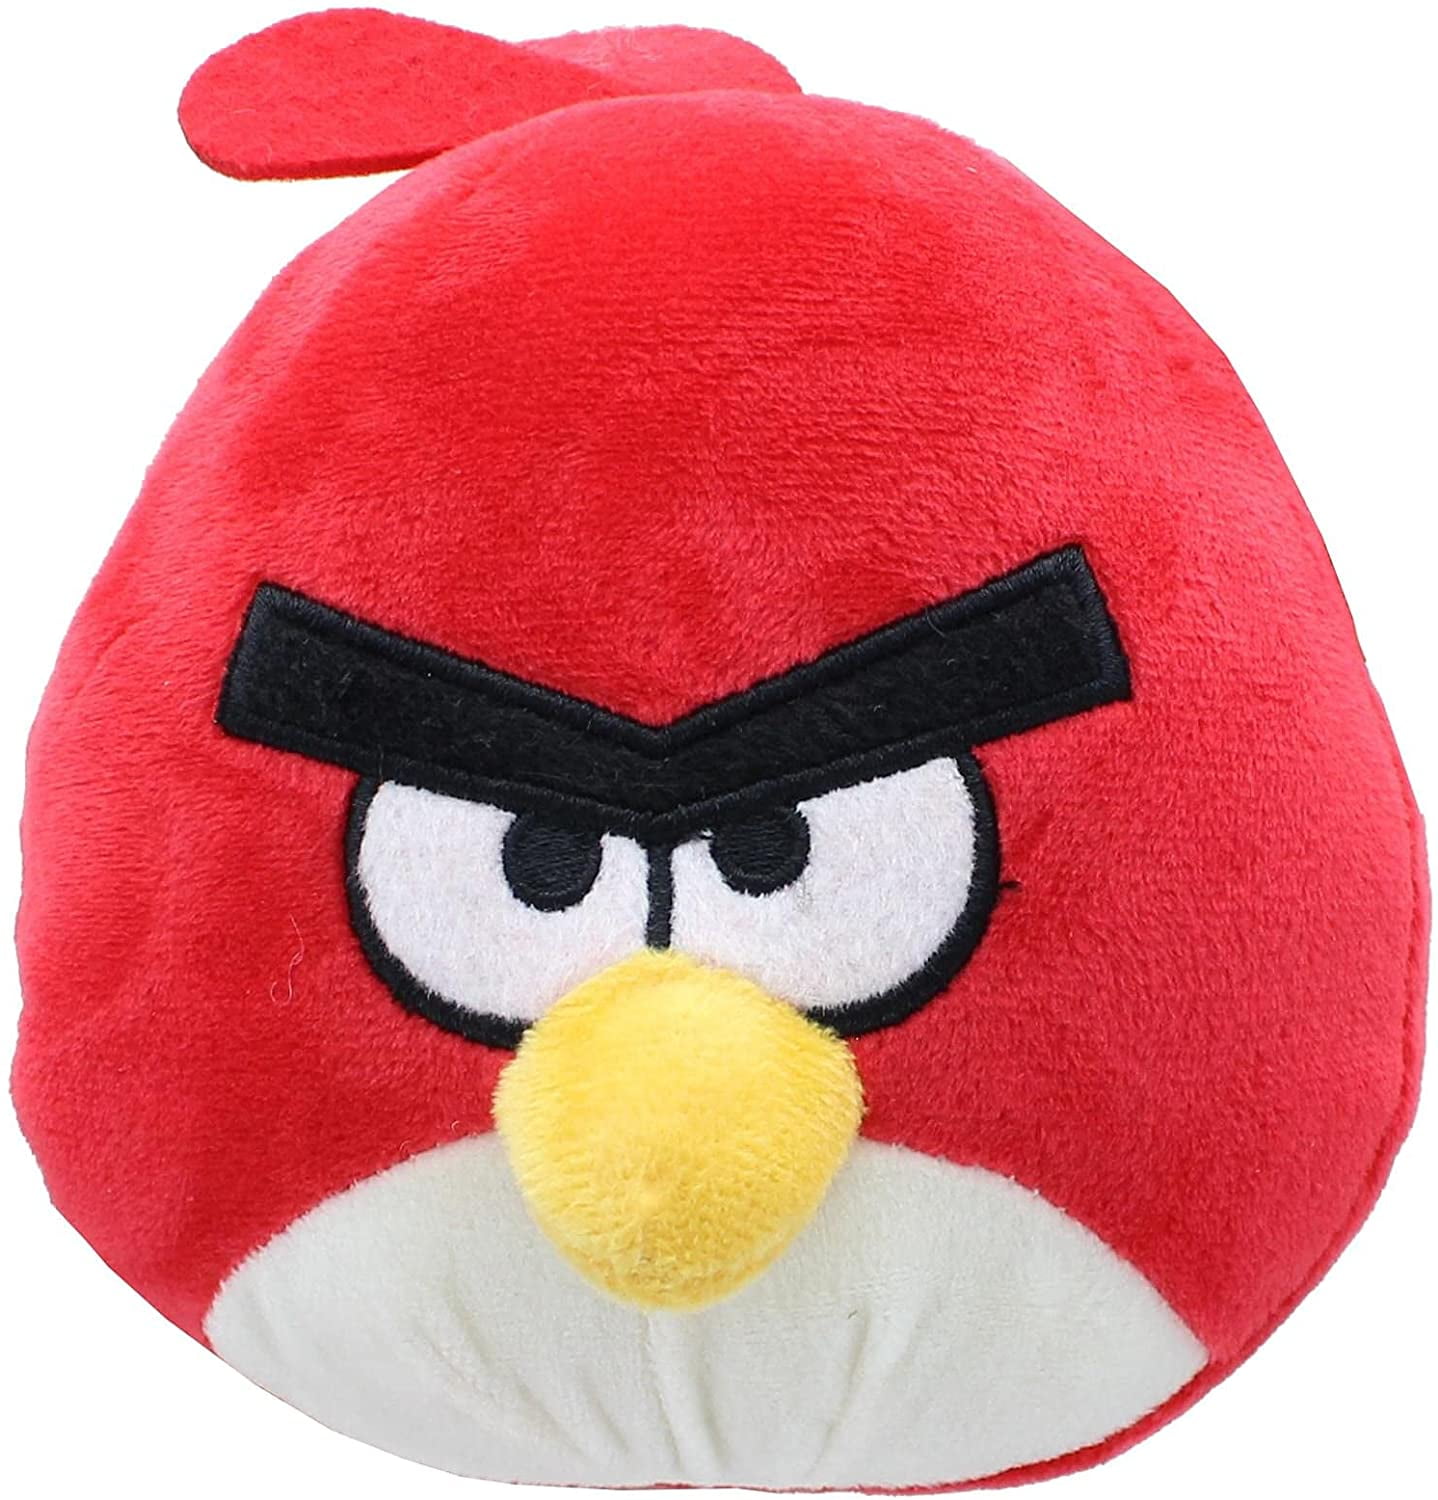 Buy Game Angry Birds Plush Toy Red Chuck Bomb Cute Anime Doll for Kids 25  cm Stuffed Animals Doll Online at Lowest Price in France. 410416425